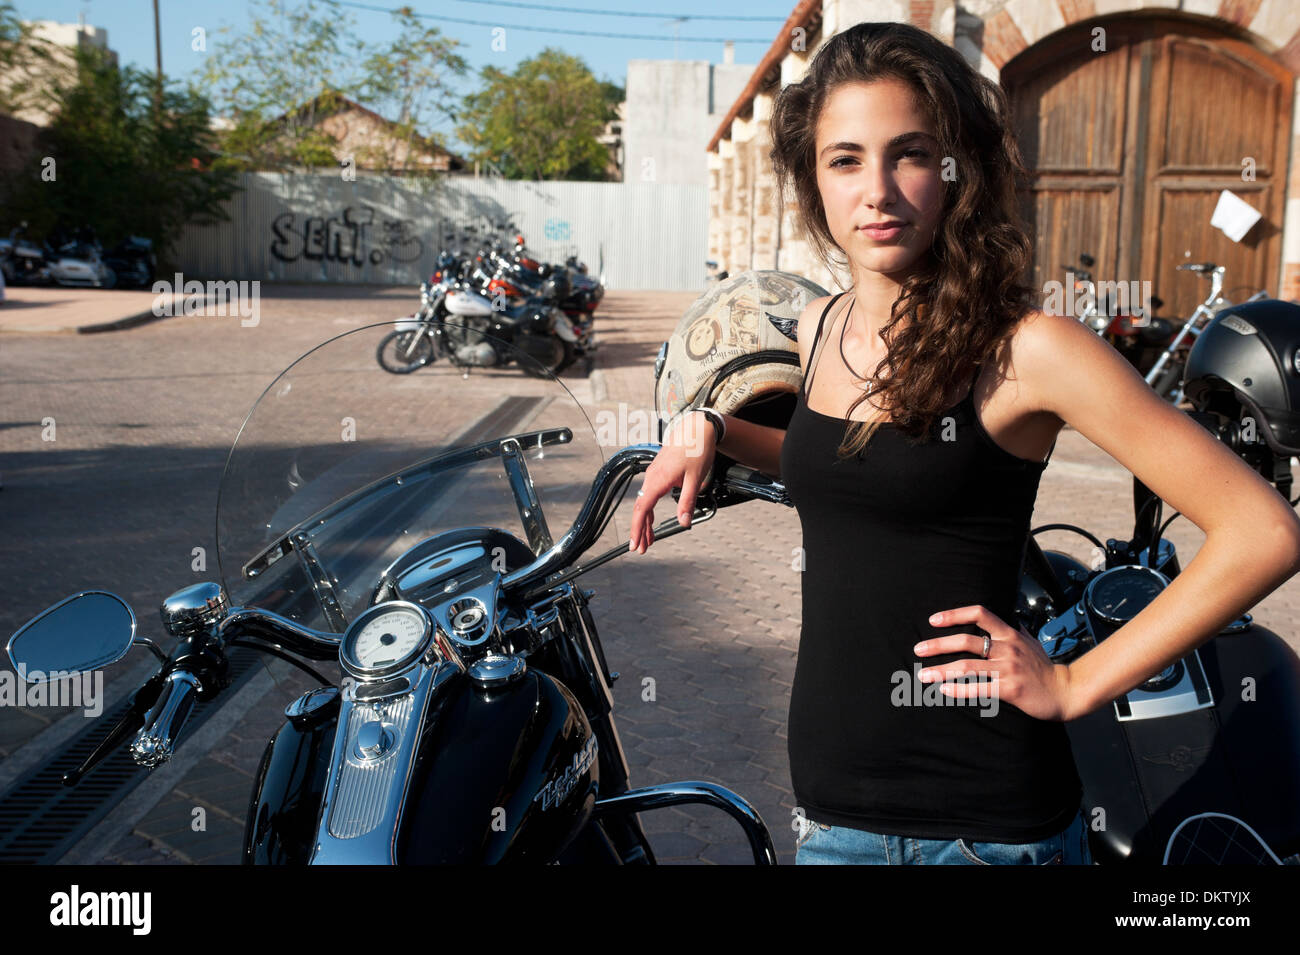 ATHENS, GREECE - OCTOBER 13: Young female stands by parked motorcycles in a Harley Davidson event in Athens on October 13, 2013 Stock Photo